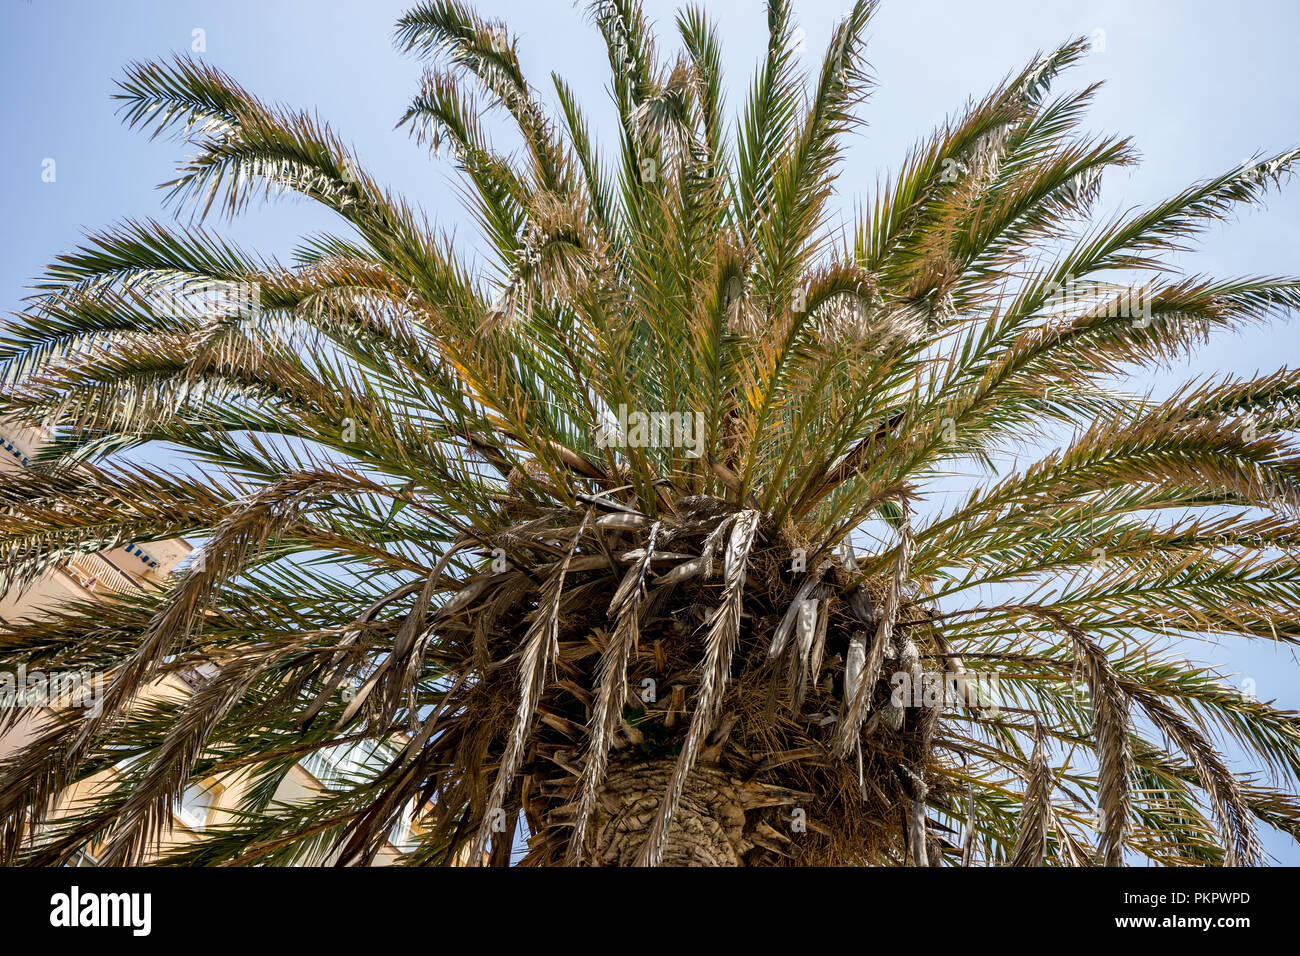 Spain, Malaga, Europe,  a group of palm trees next to a tree Stock Photo